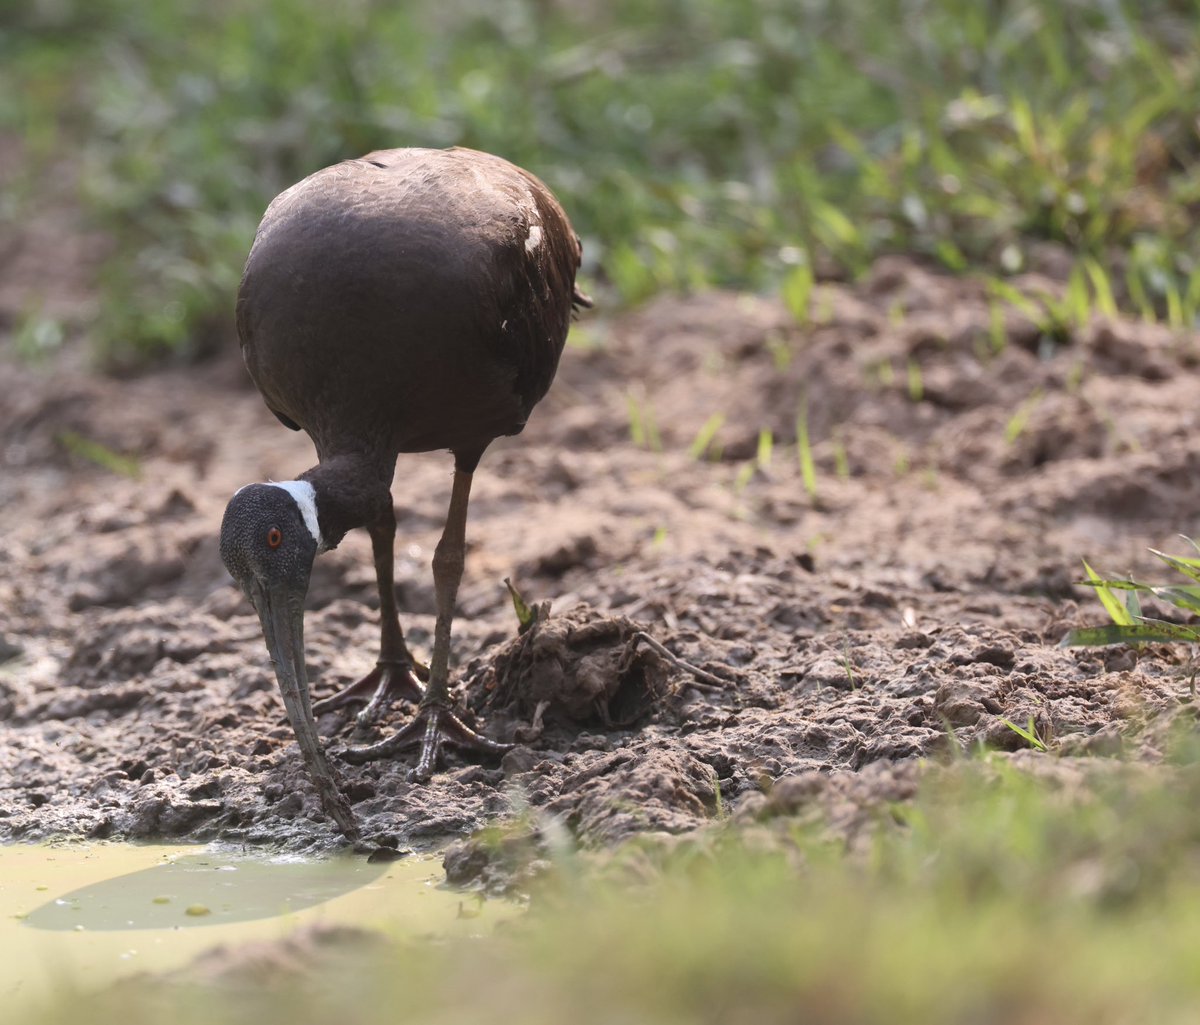 With a global population of less than 500 mature birds, the White-shouldered Ibis (#BirdsSeenIn2024) is one of the most threatened large waterbirds in Asia. Thankfully this bird looked well and was one of three birds feeding in this Cambodian field [BirdingInChina.com].